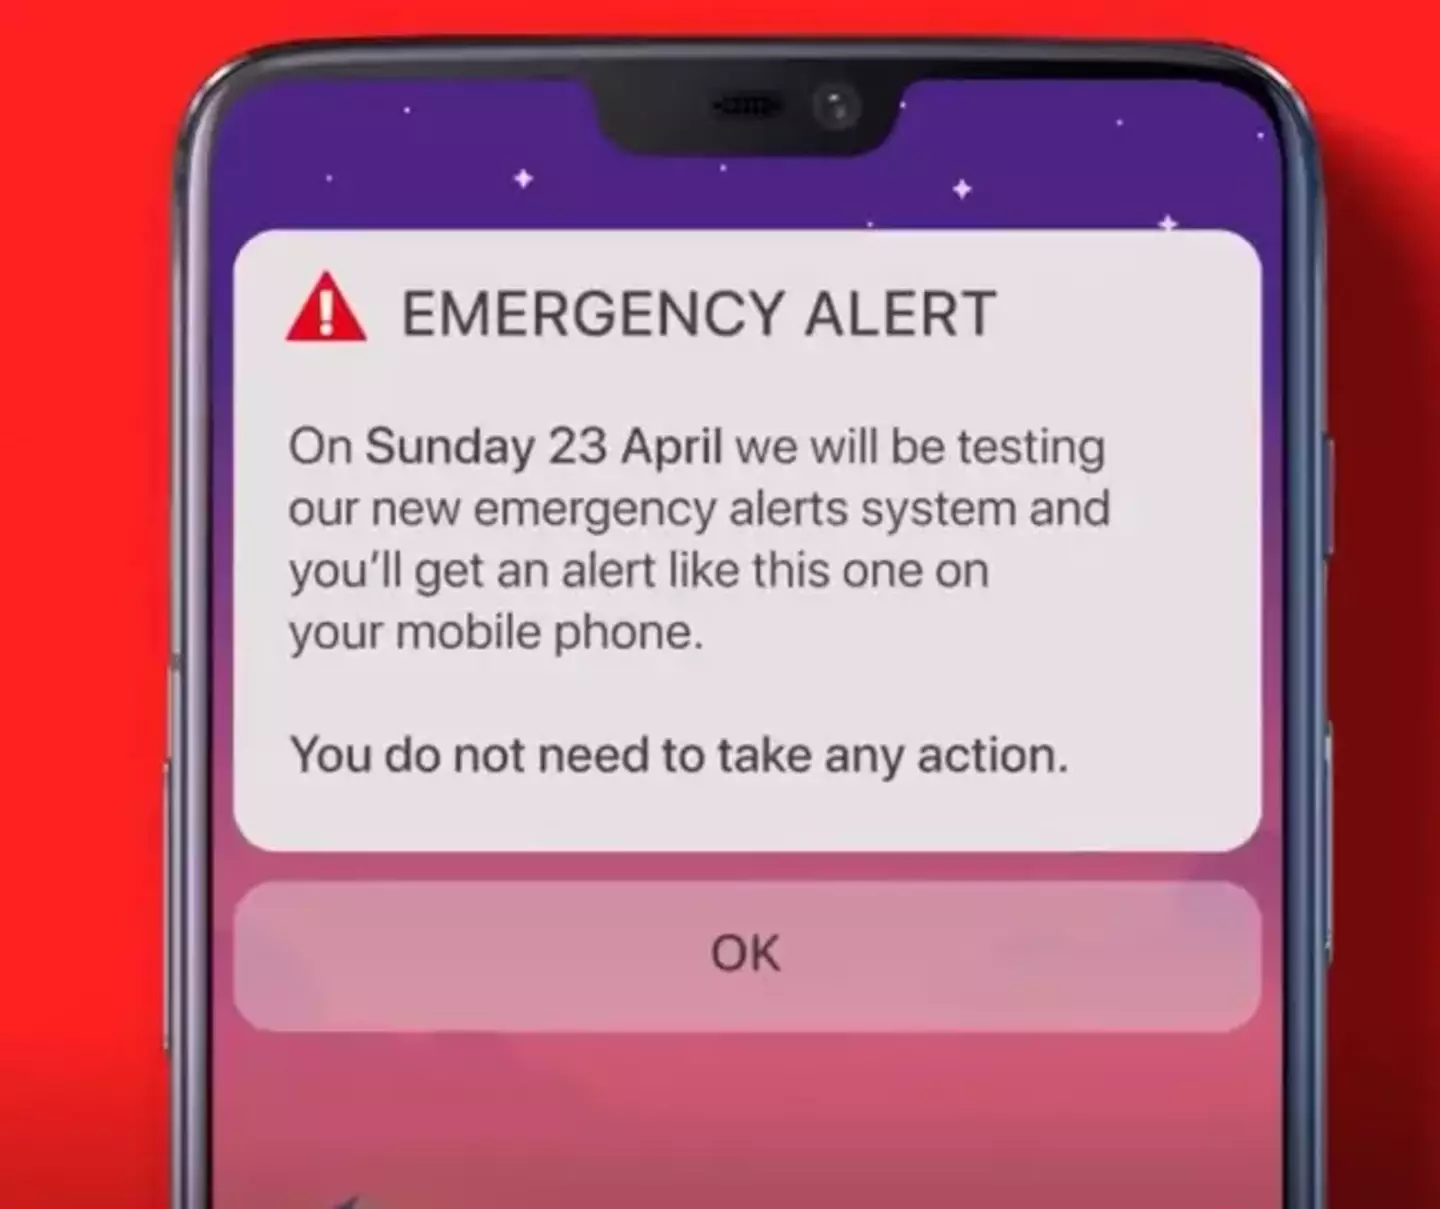 Pretty much every phone in the UK will sound with an alarm this coming Sunday.